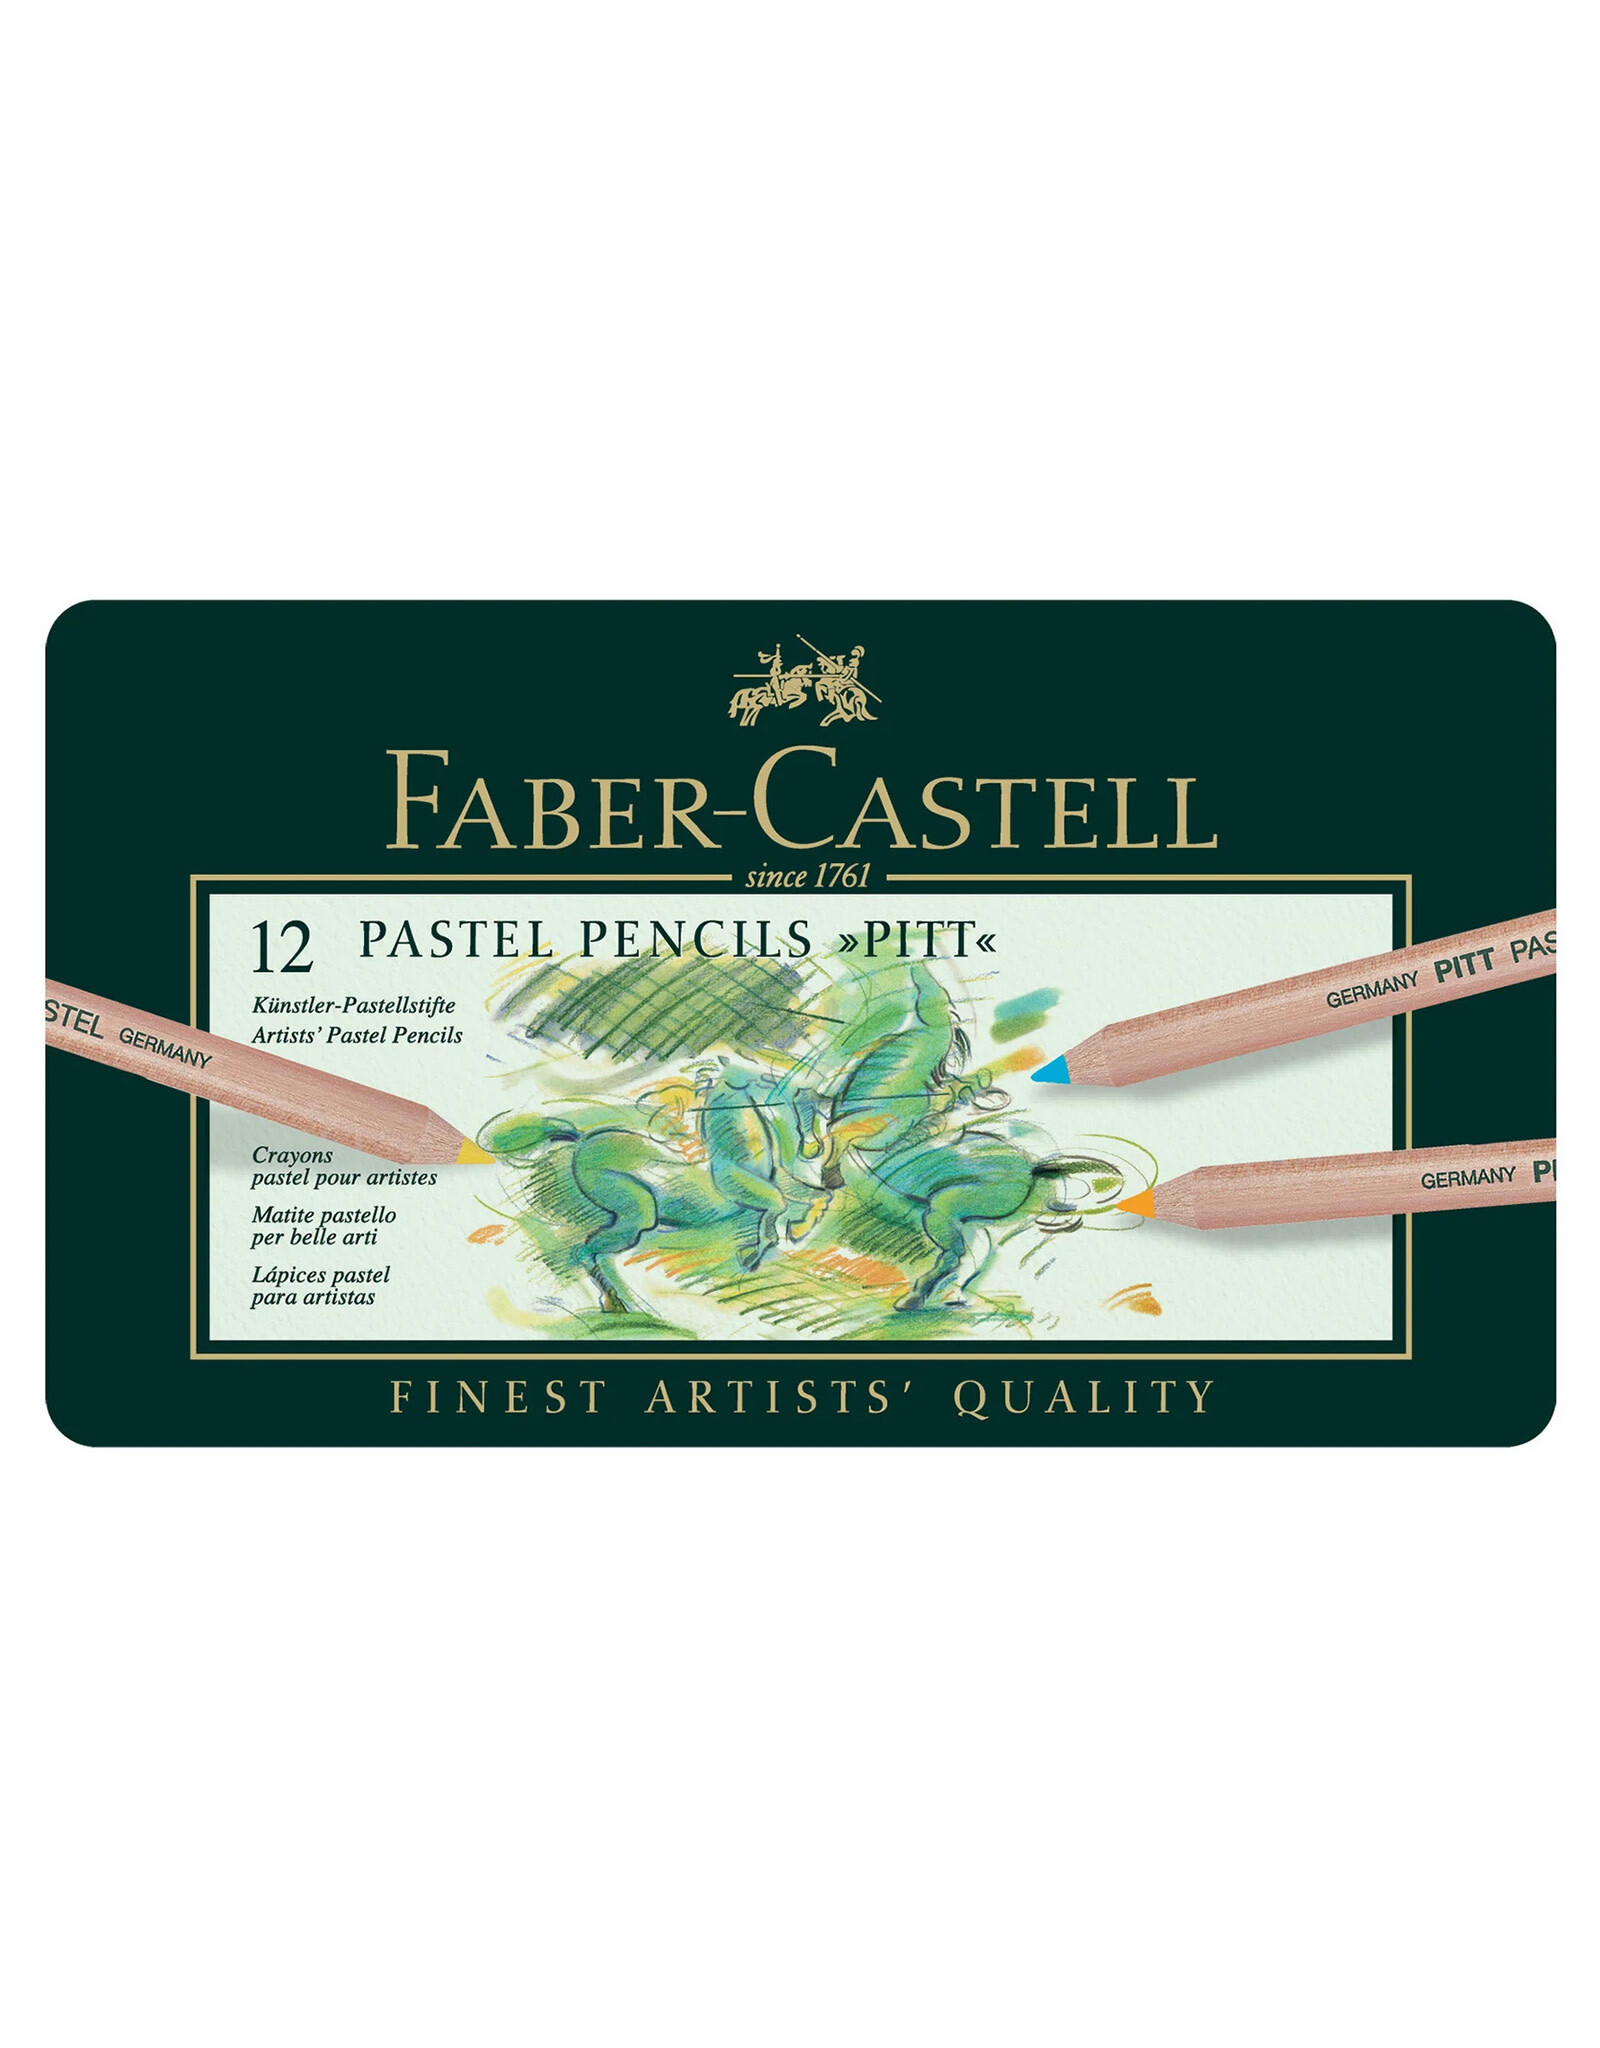 FABER-CASTELL Faber-Castel Pitt Pastel Pencils in A Metal Tin 12 Pack, Assorted